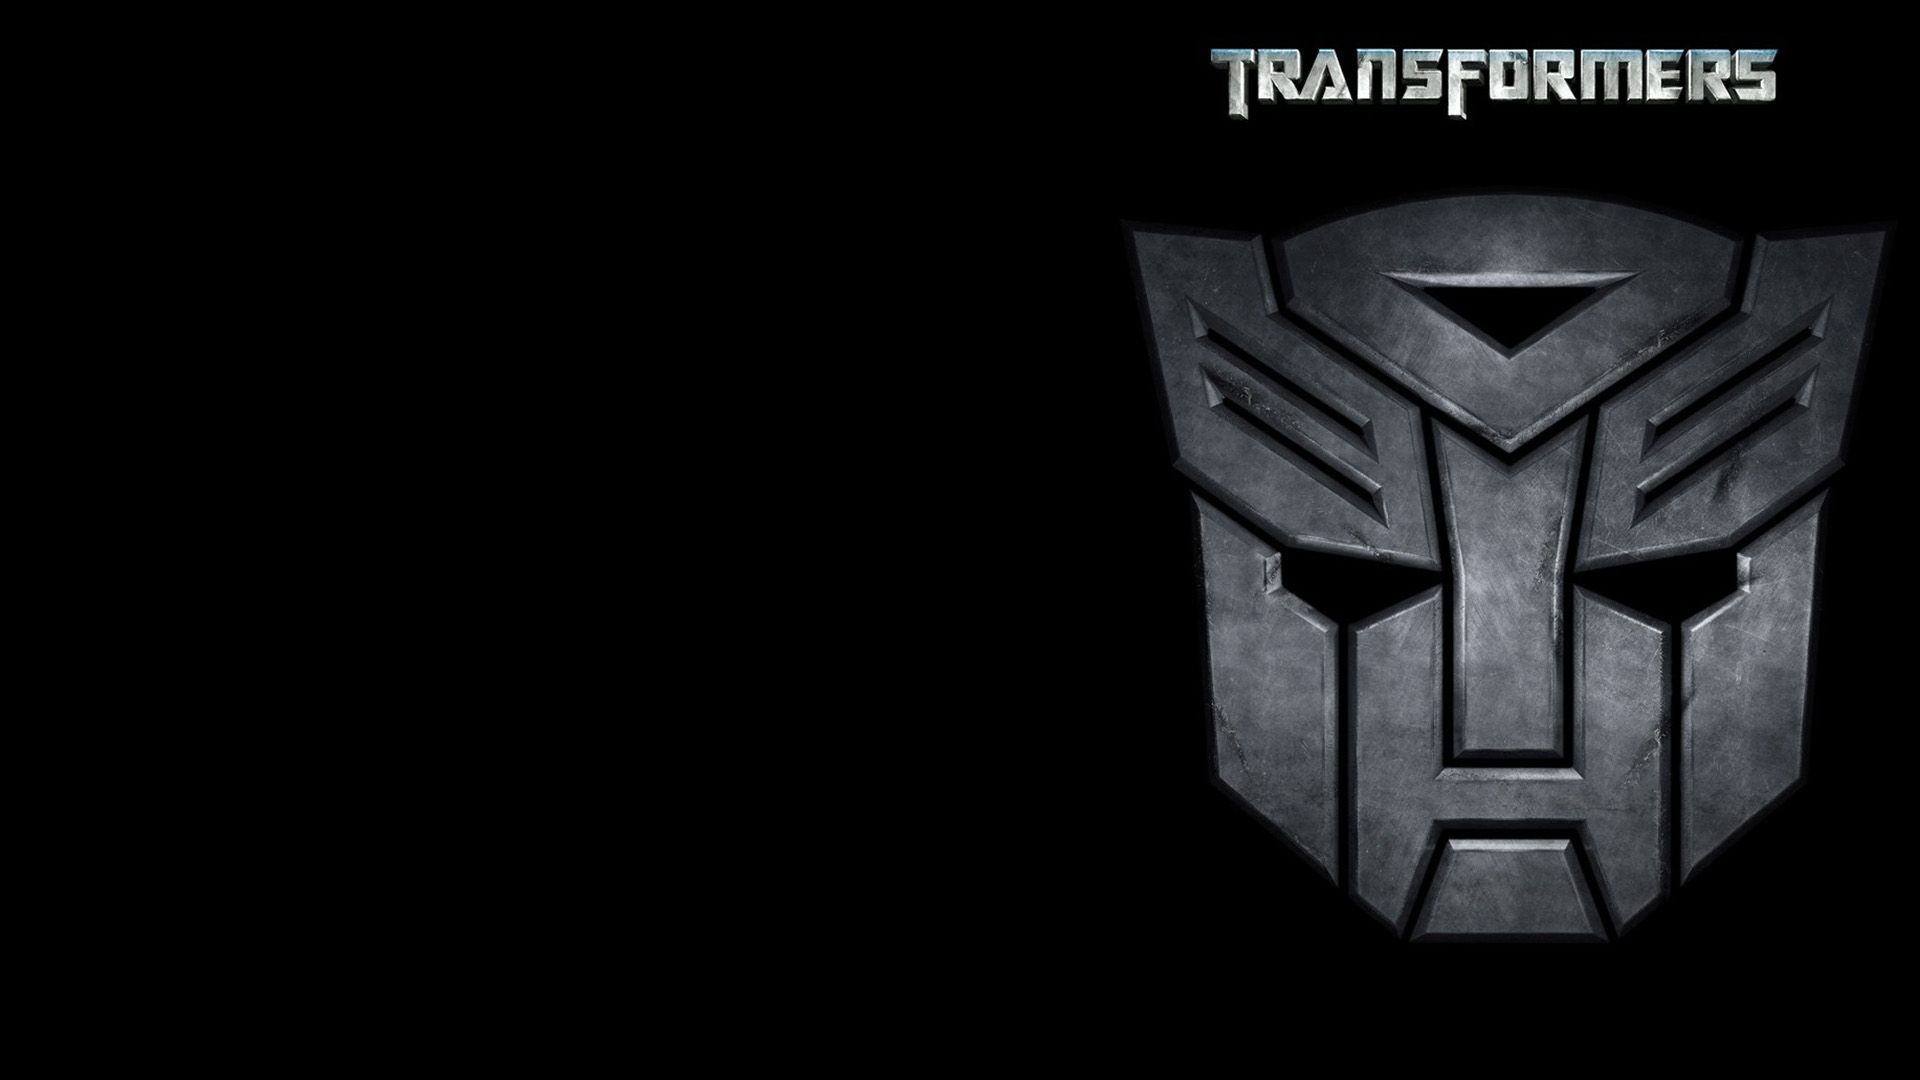 Transformers Autobot Logo Exclusive HD Wallpapers #5141